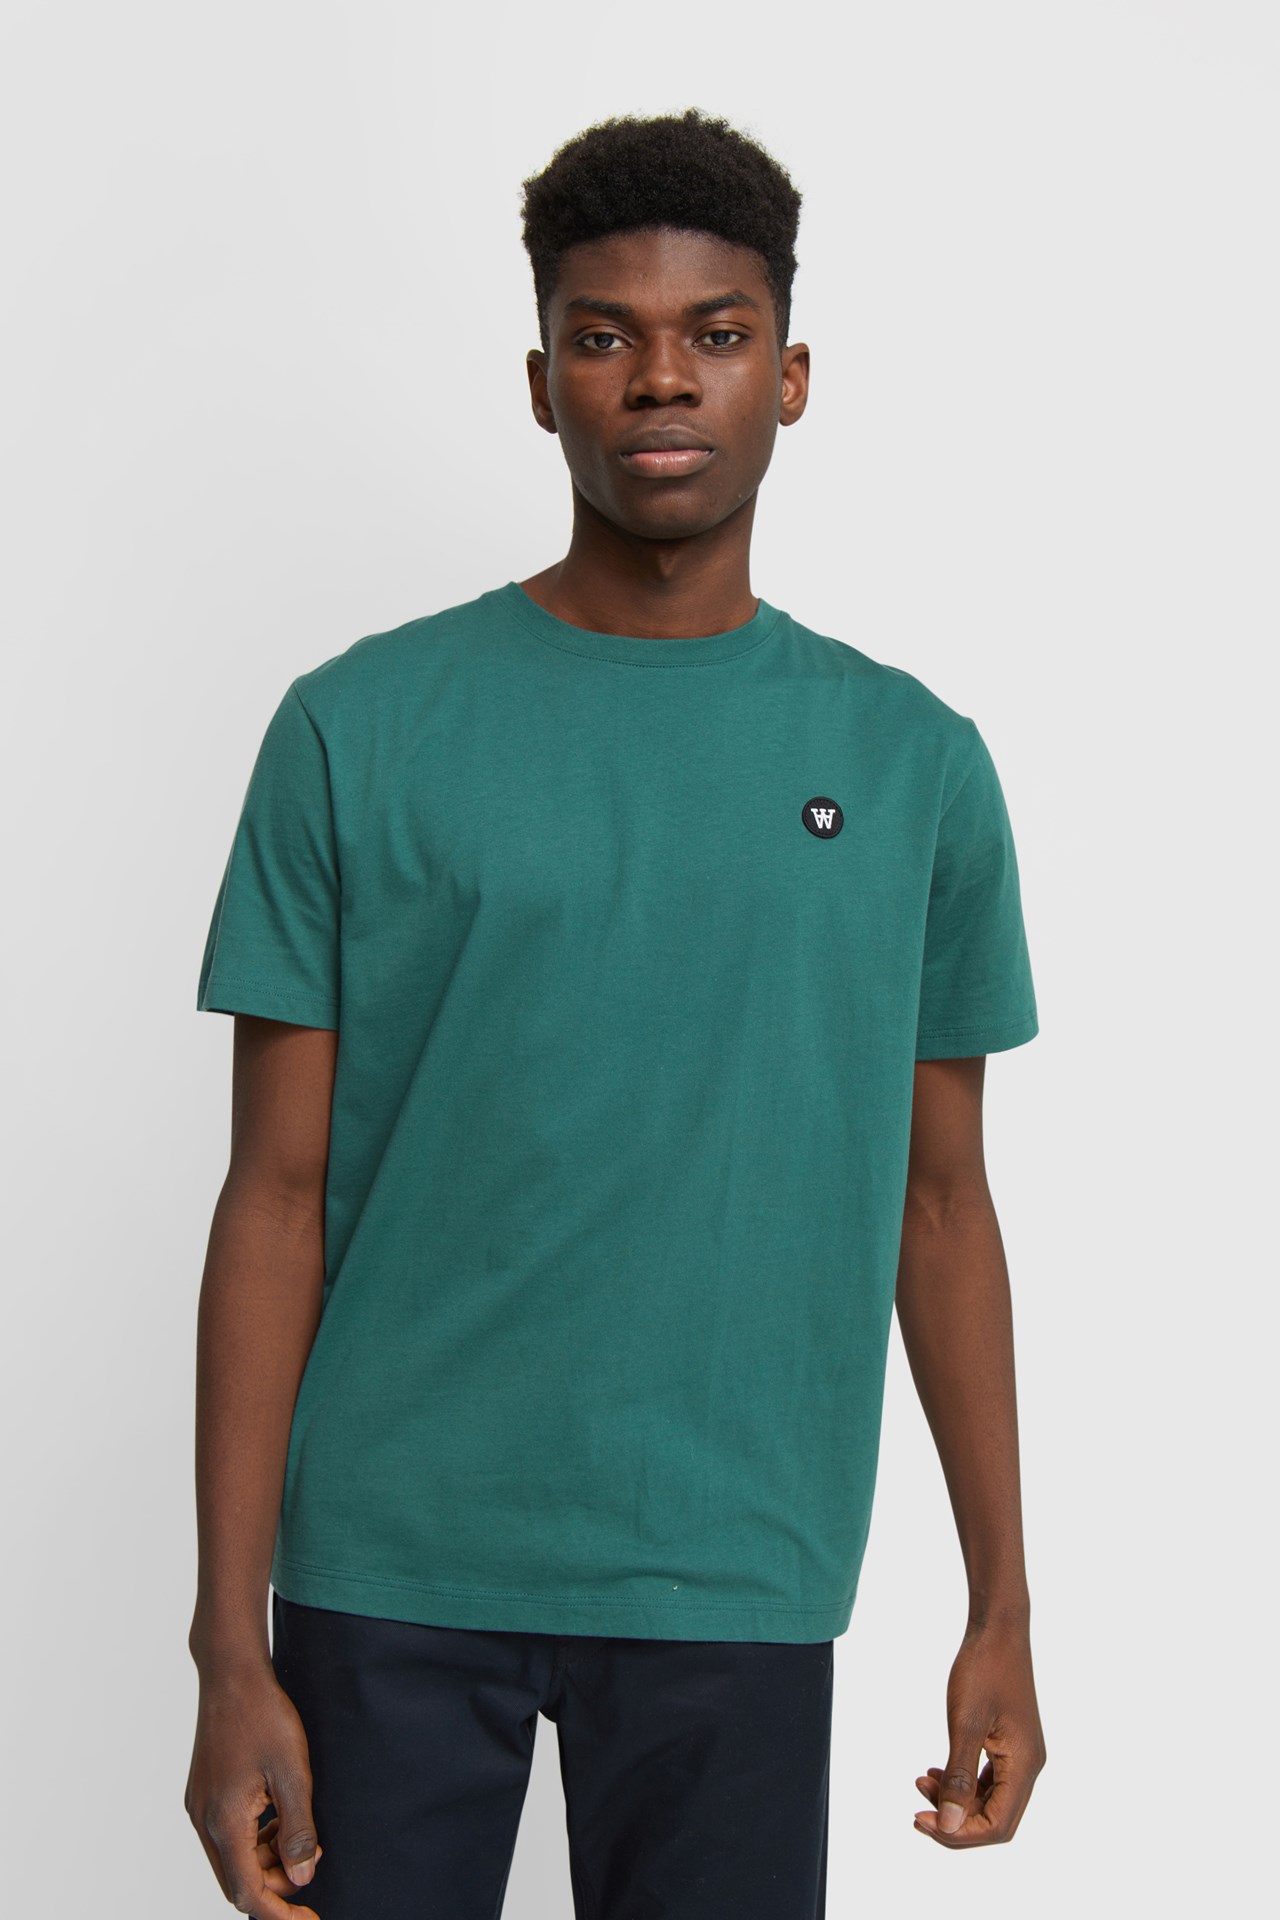 Double A by Wood Wood Ace T-shirt Faded green | WoodWood.com